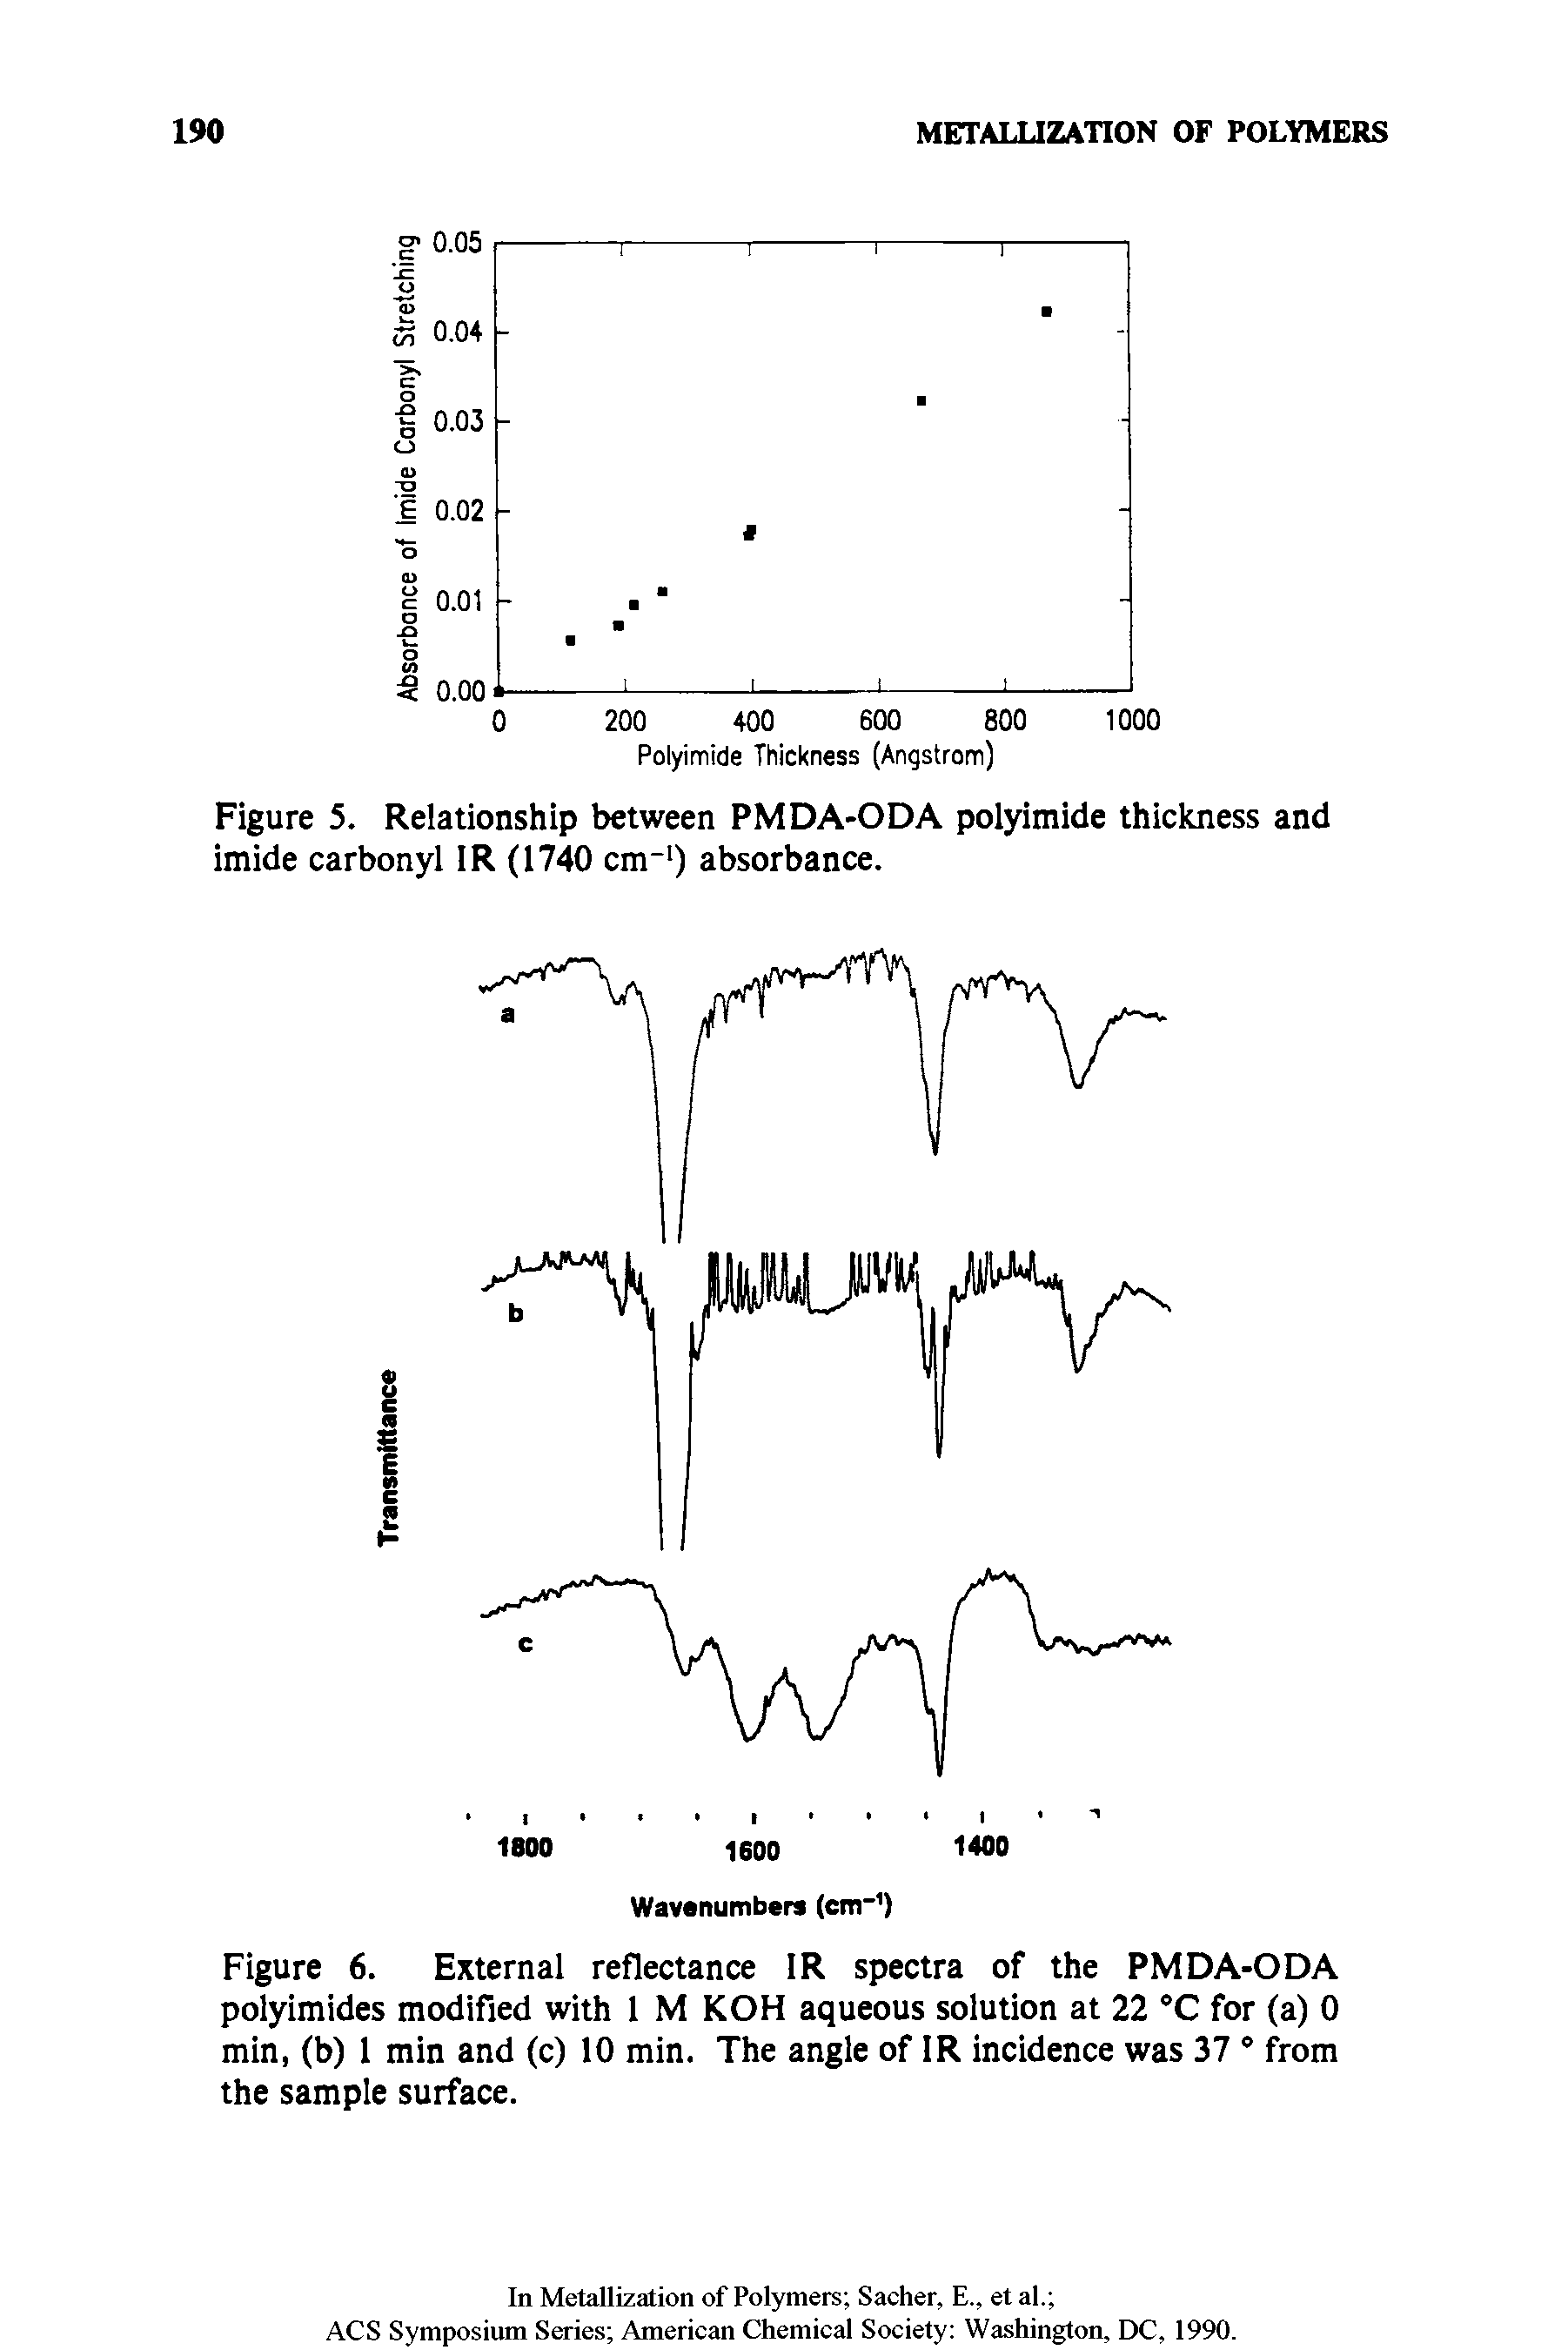 Figure 6. External reflectance 1R spectra of the PMDA-ODA polyimides modified with 1 M KOH aqueous solution at 22 °C for (a) 0 min, (b) 1 min and (c) 10 min. The angle of 1R incidence was 37 0 from the sample surface.